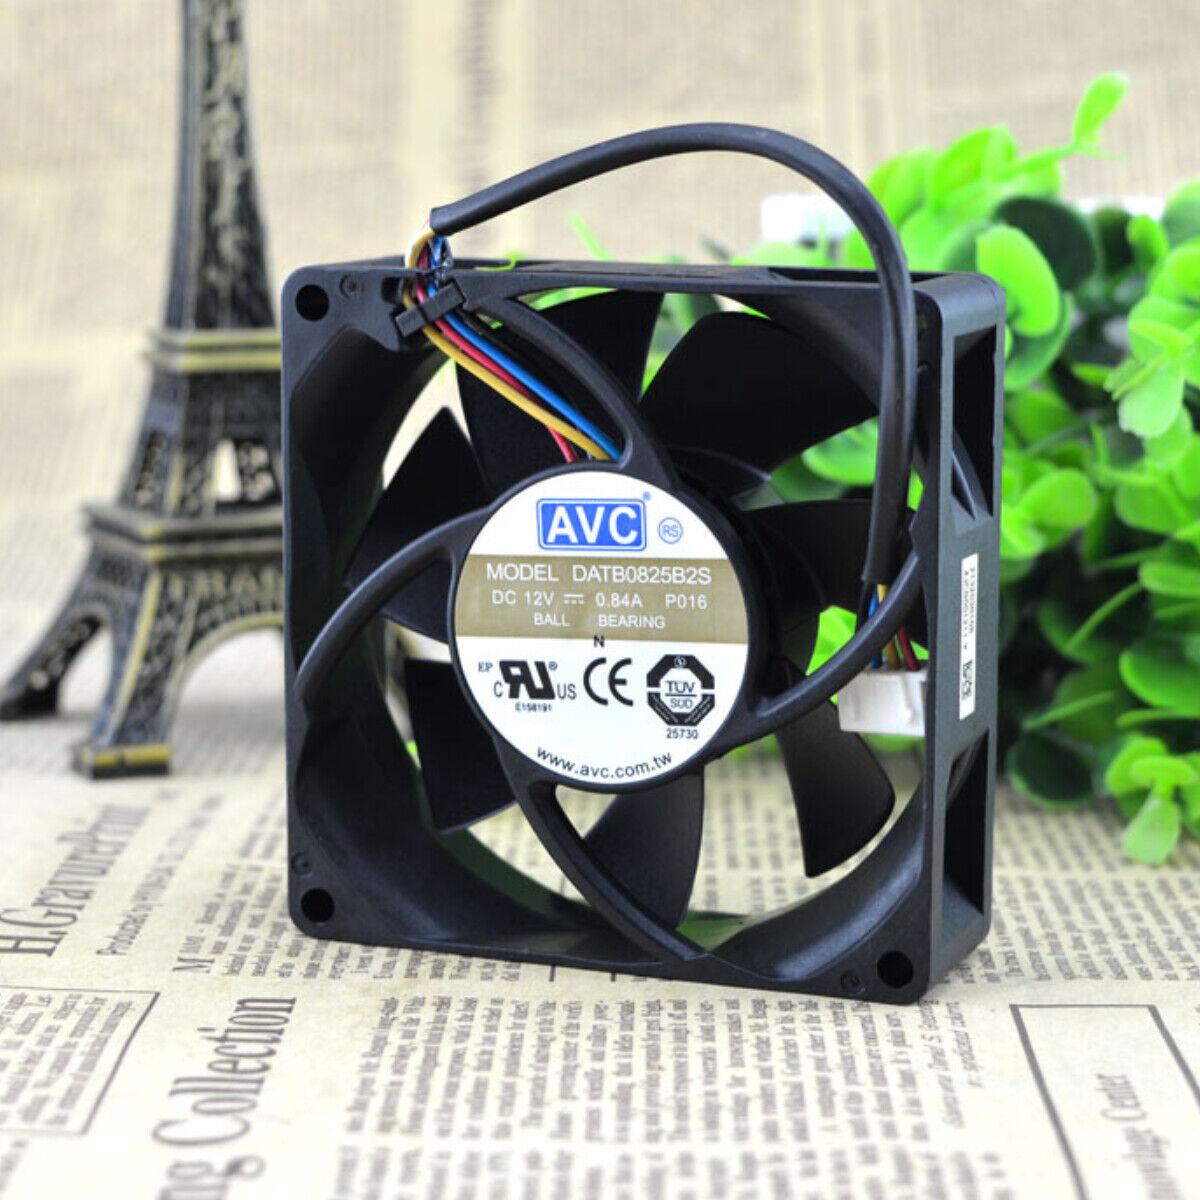 AVC 8025 8CM DATB0825B2S12V 0.84A 4-wire PWM Speed Control Violent Cooling Fan